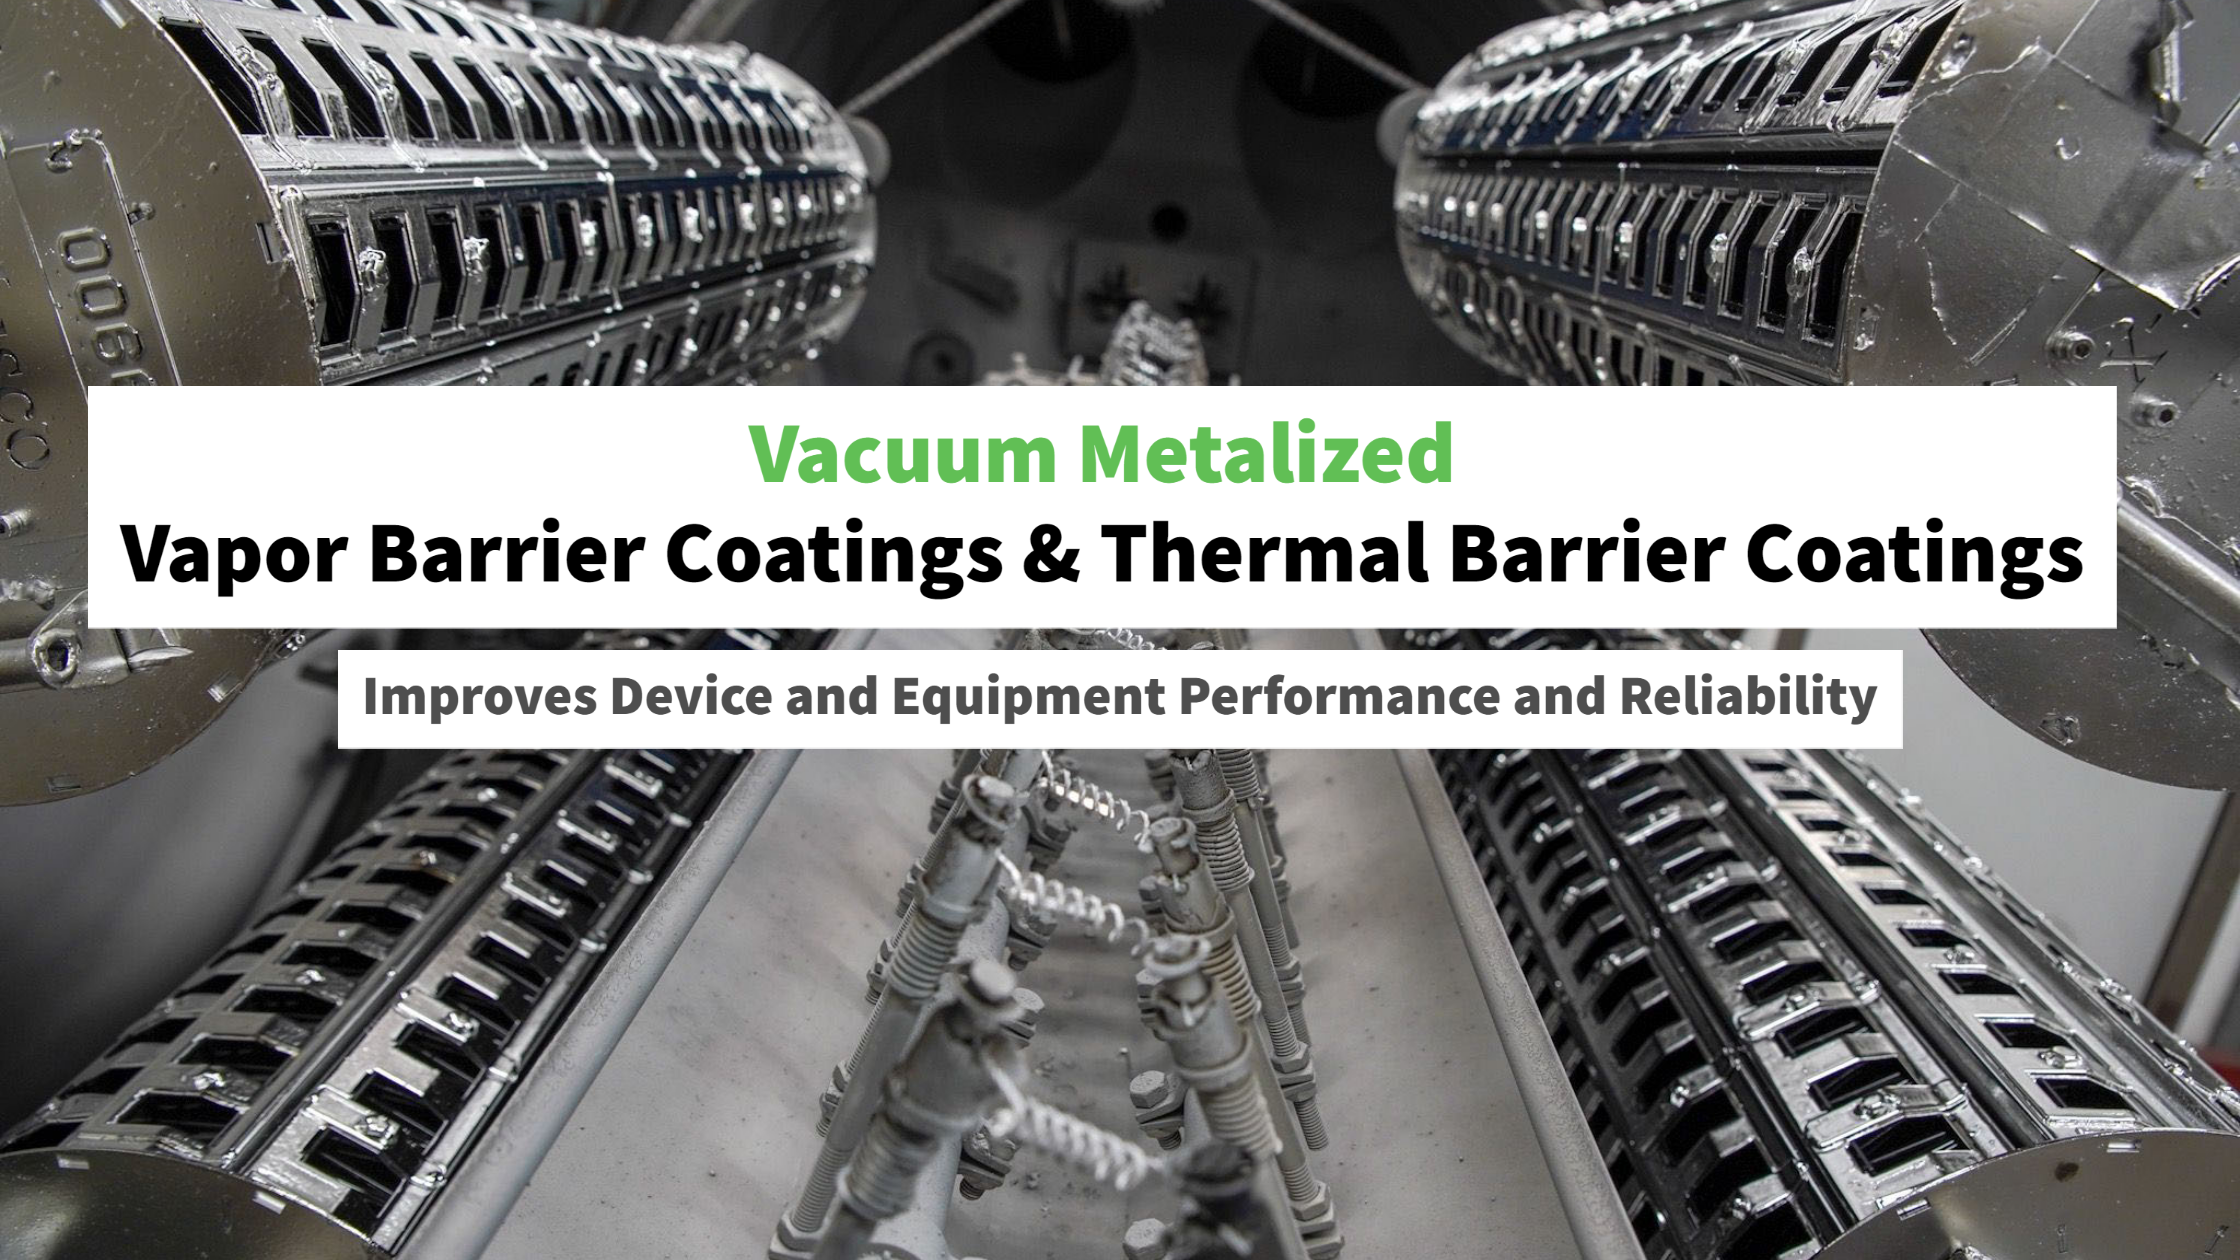 Text: Vacuum Metalized Vapor Barrier Coatings and Thermal Barrier Coatings Are Helping to Improve Device and Equipment Performance and Reliability. Vacuum Metal machine in the background